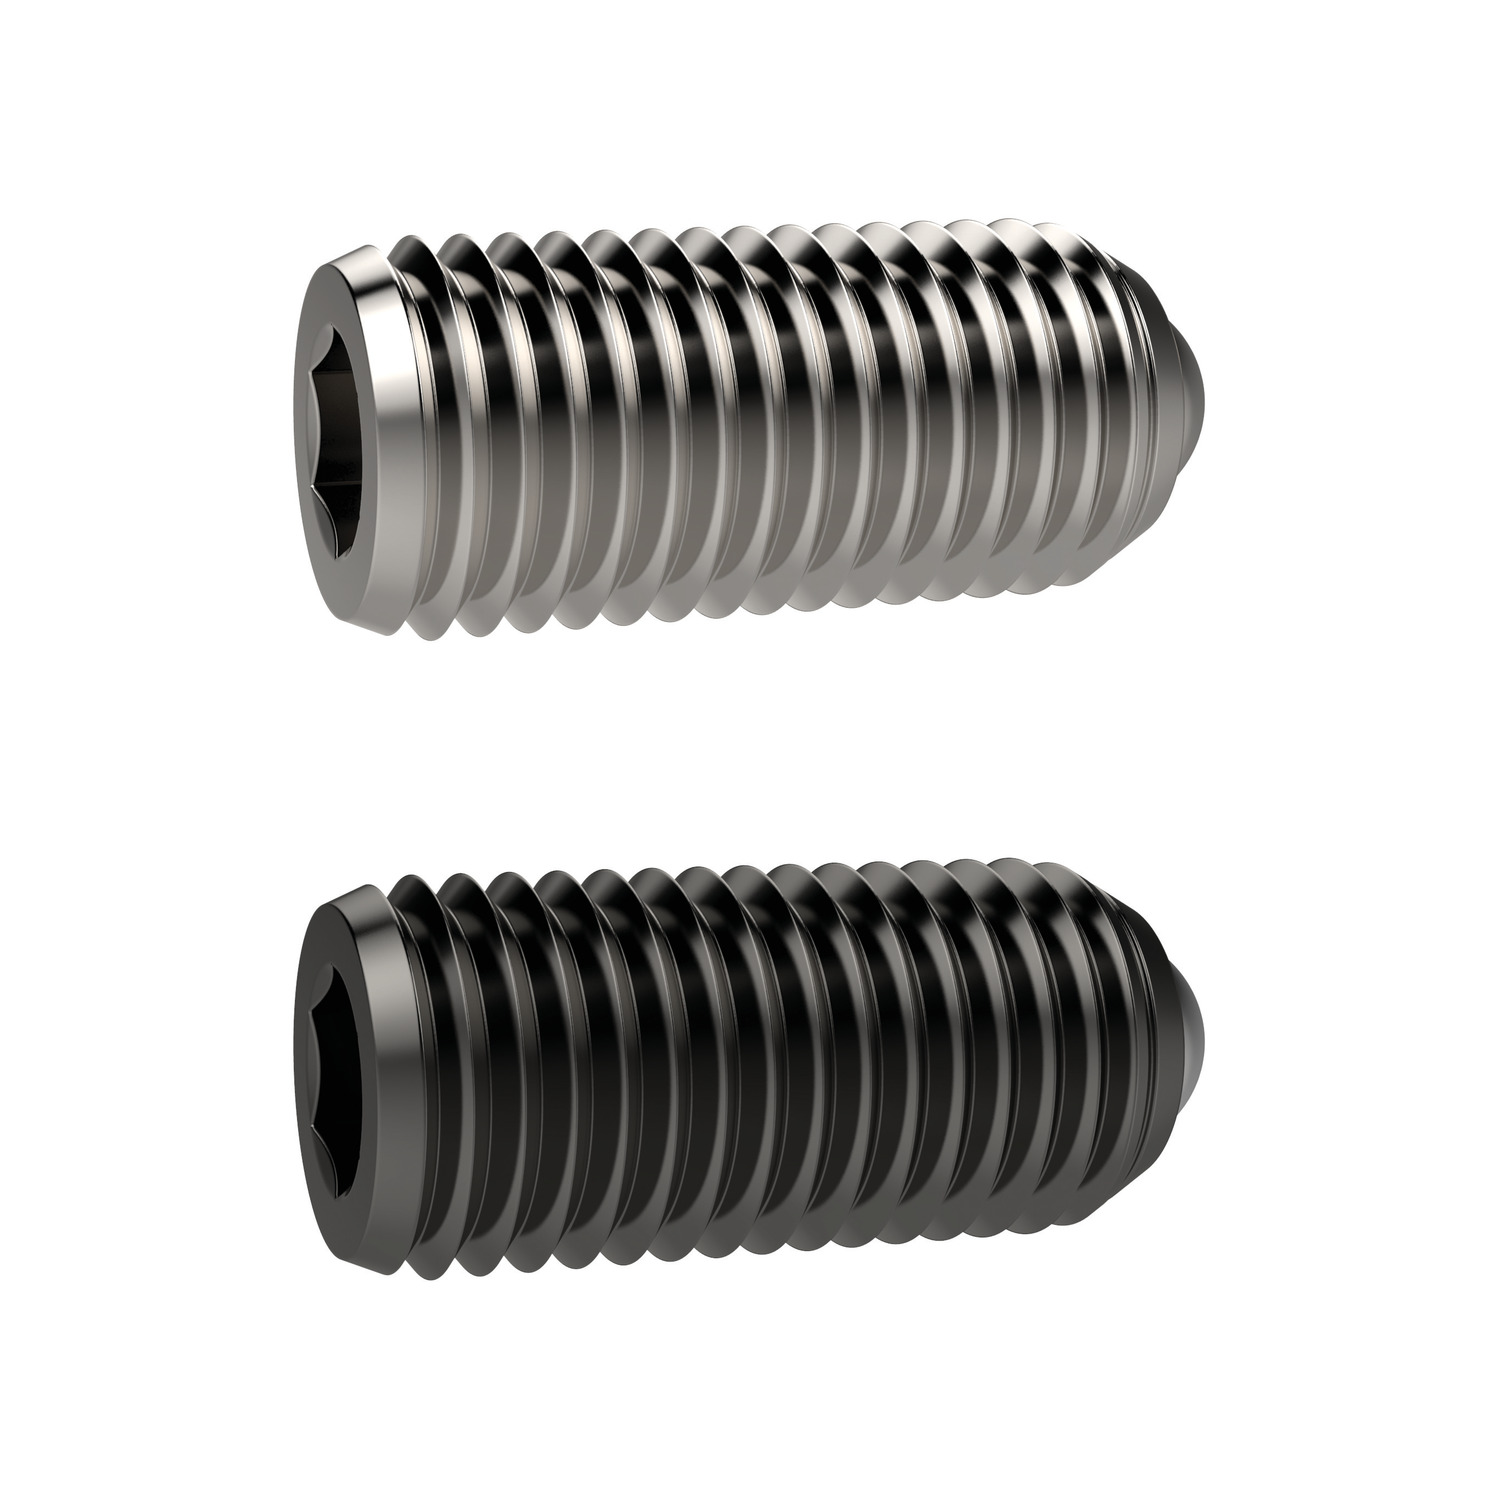 Spring Plungers Spring plungers with ball end & hex. socket. Available in steel or stainless steel. These spring plungers may be used for location, for applying pressure or lifting off.